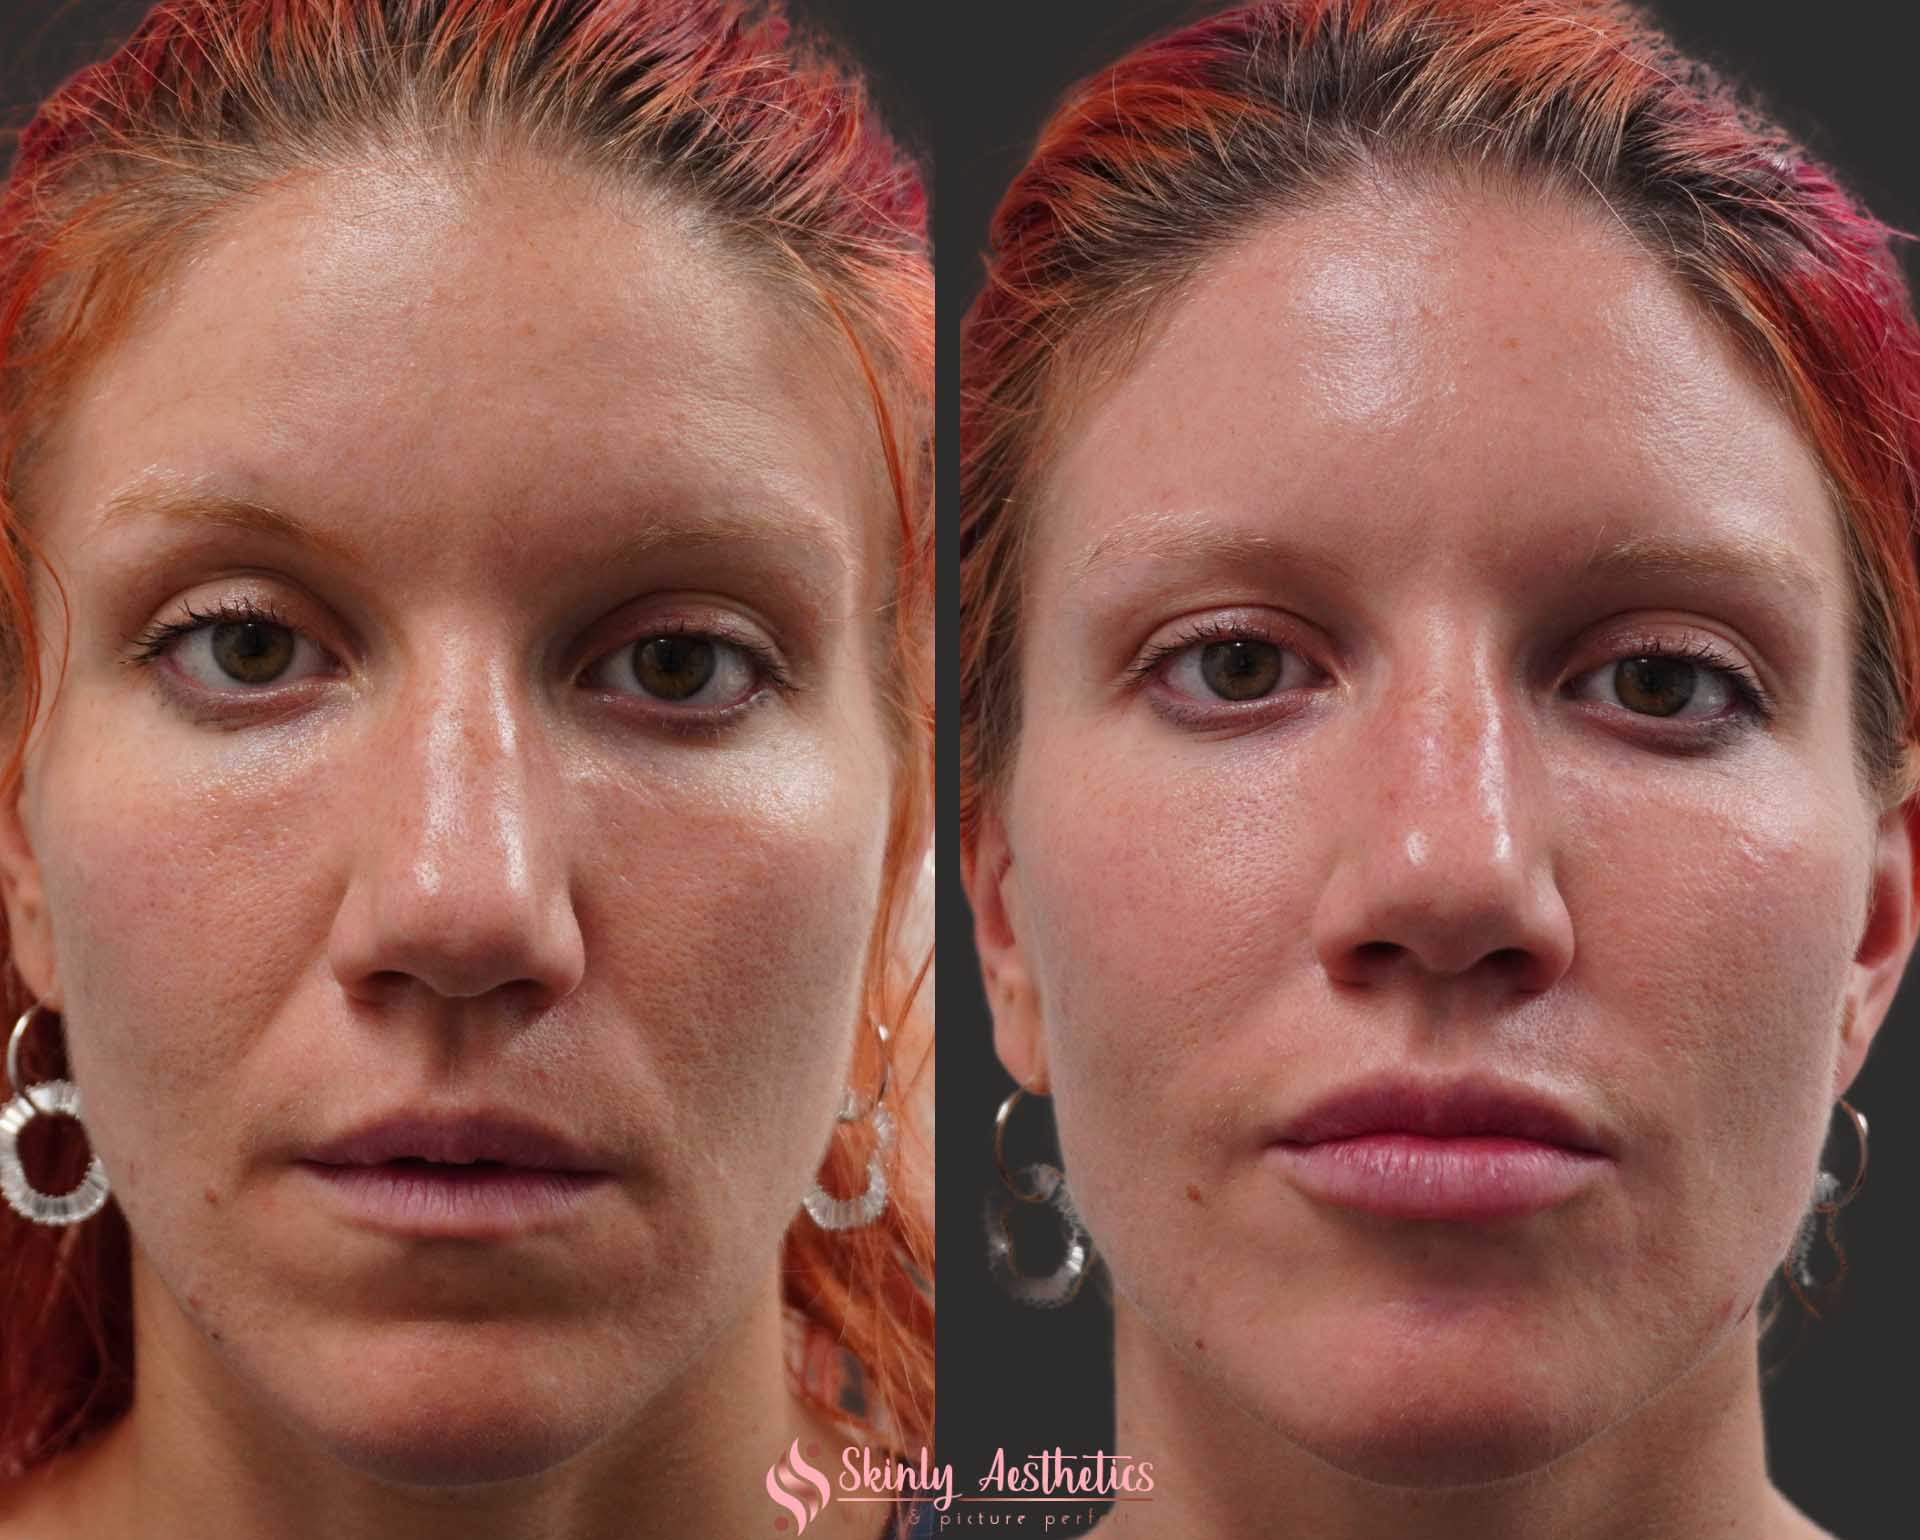 Smile Line Fillers Before & After Results at Skinly